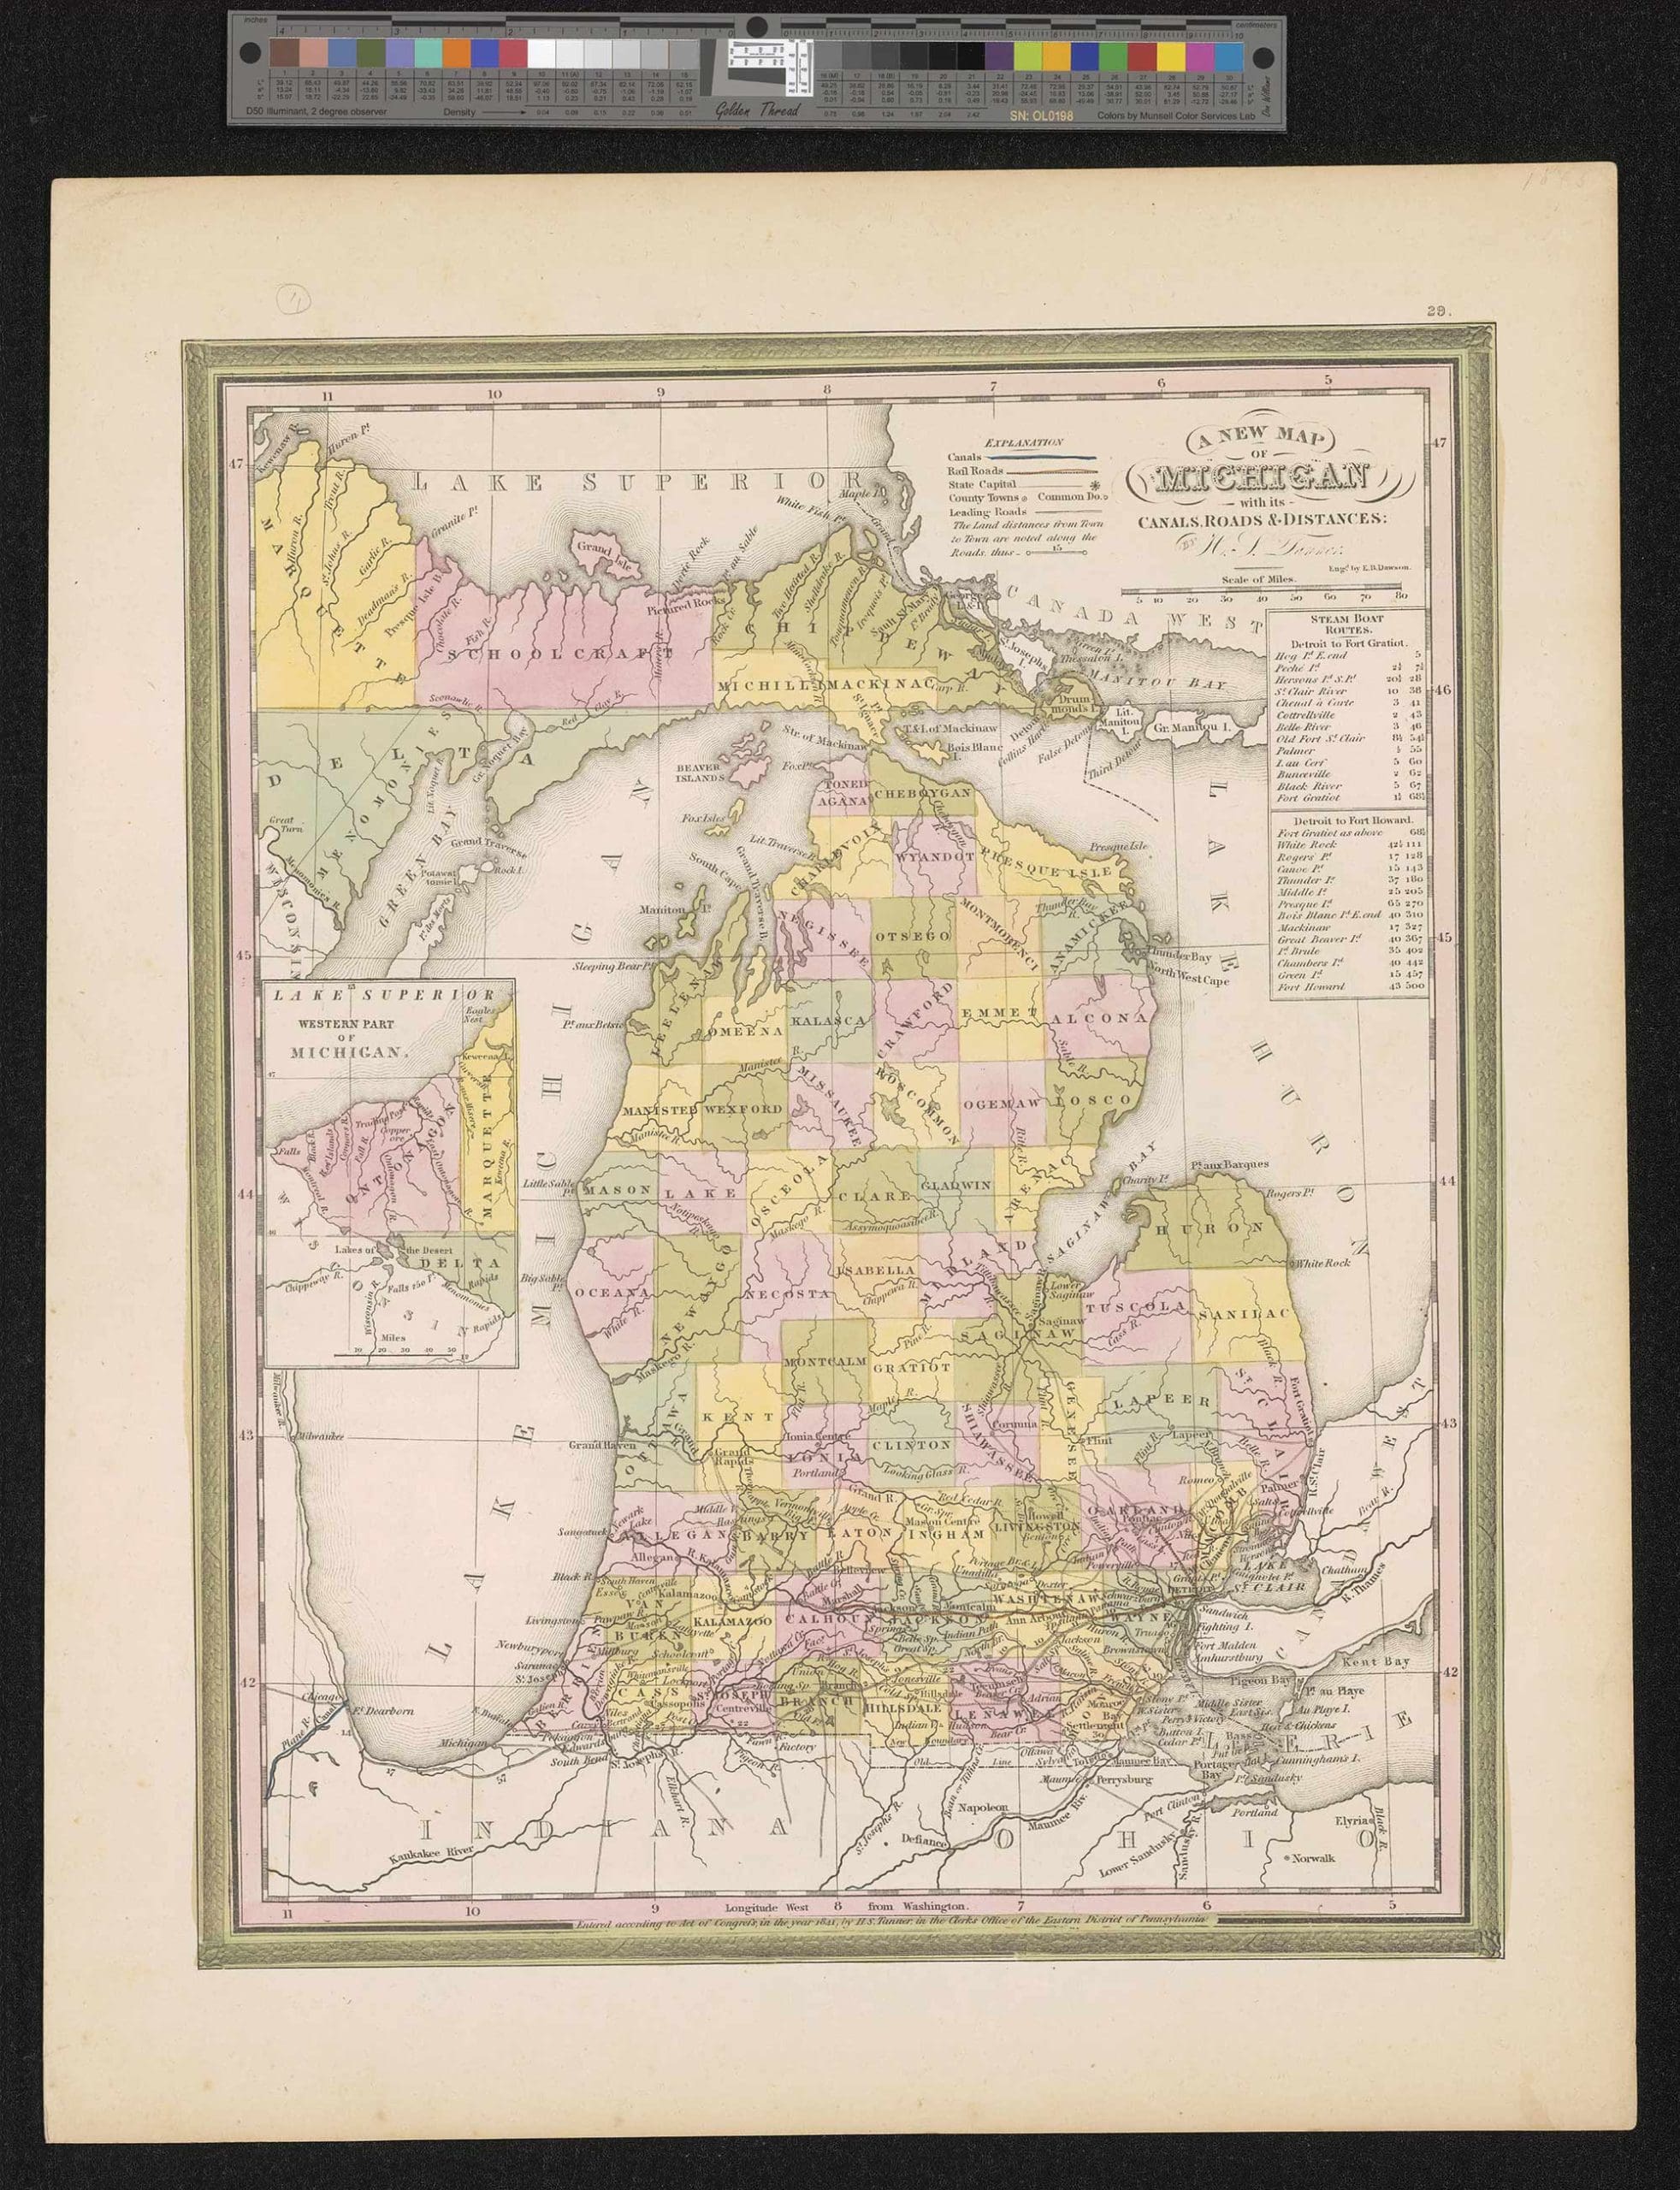 A new map of Michigan with its canals, roads & distances, 1841